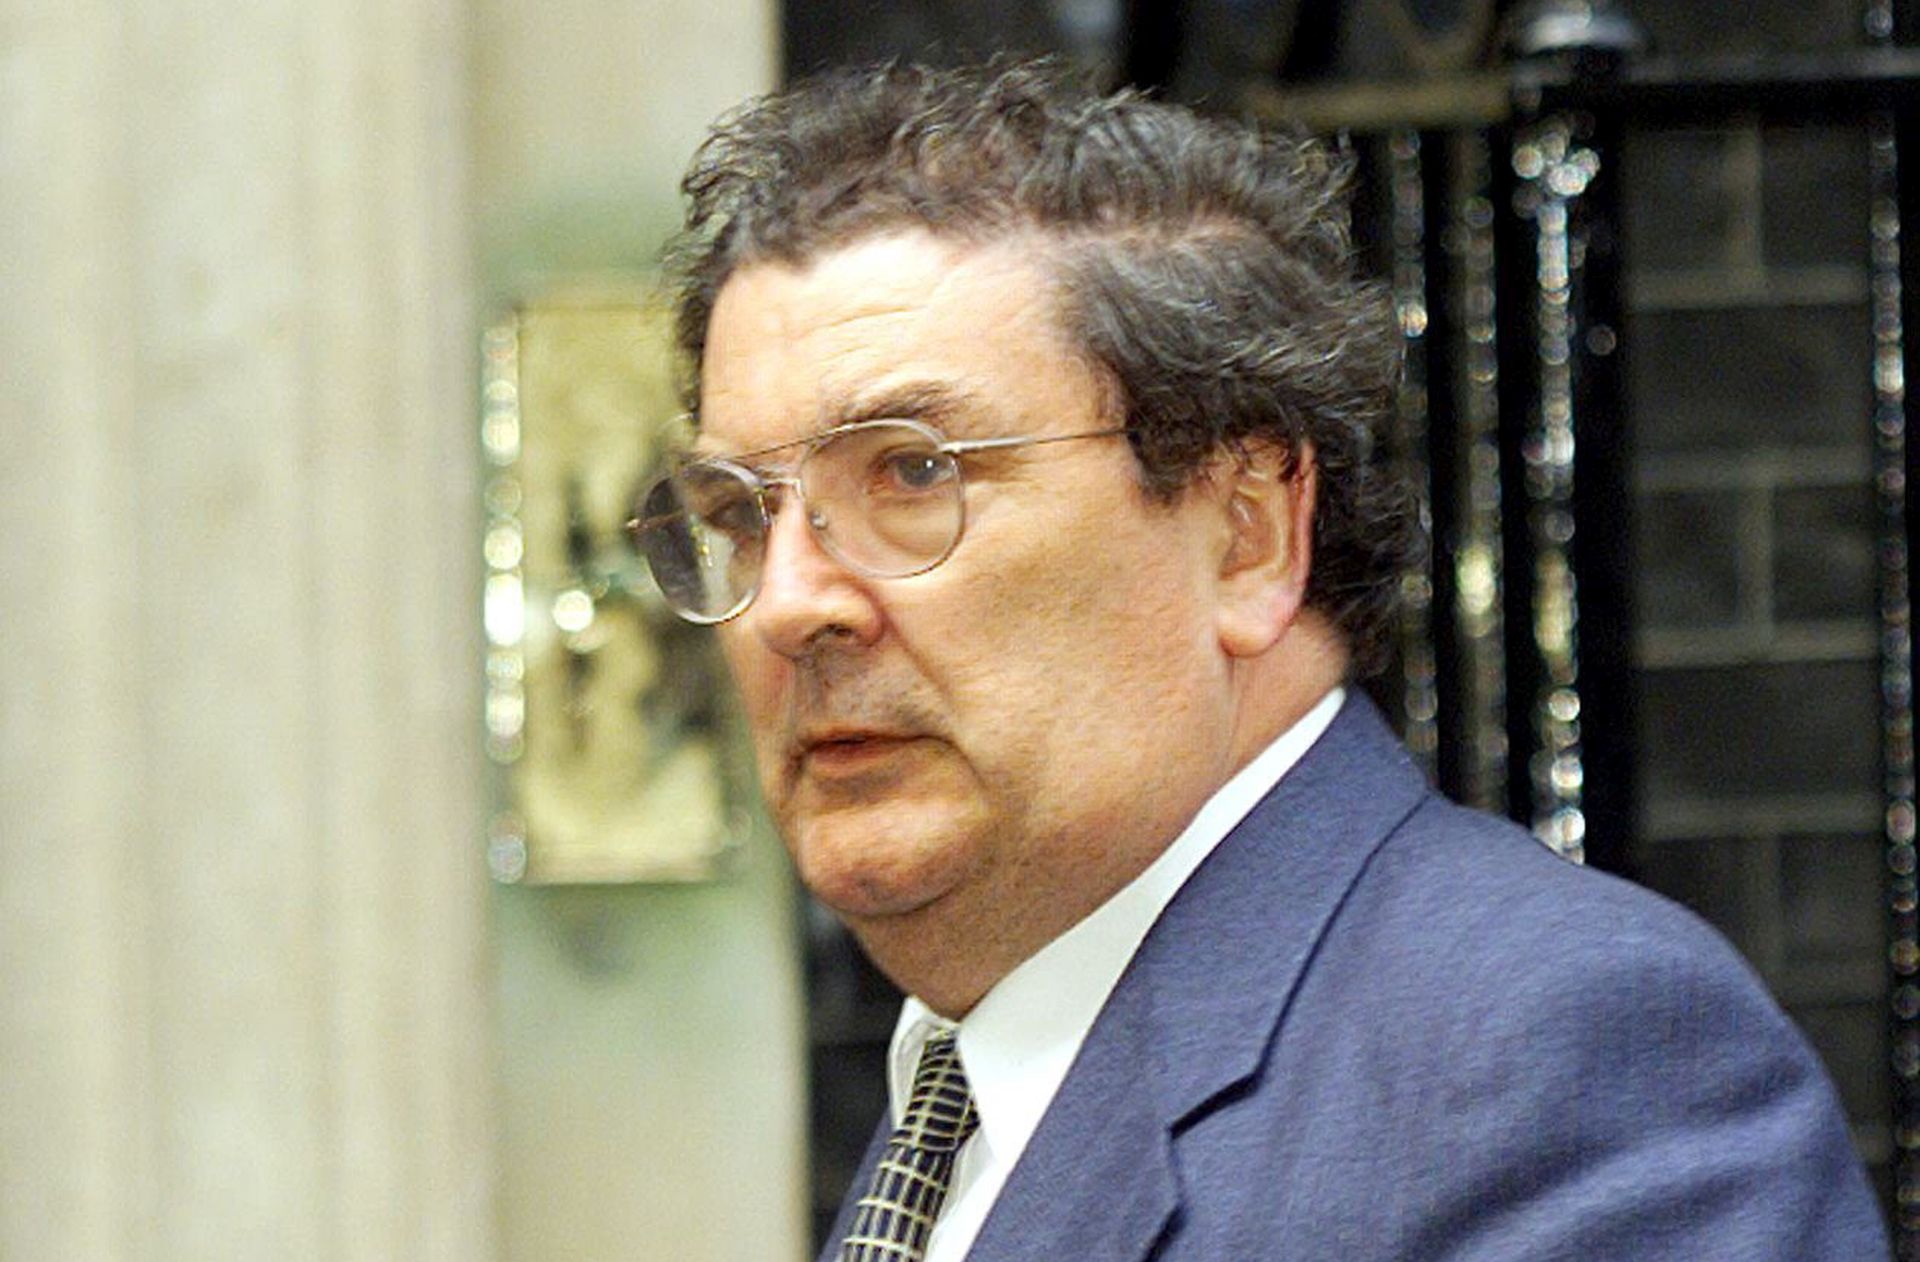 epa08581630 (FILE) - SDLP leader John Hume arrives at No.10 Downing Street 19 April, before  talks with British Prime Minister Tony Blair on the Northern Ireland Good Friday peace talks crisis. John Hume died aged 83 years old on 03 August 2020.  EPA/GERRY PENNY